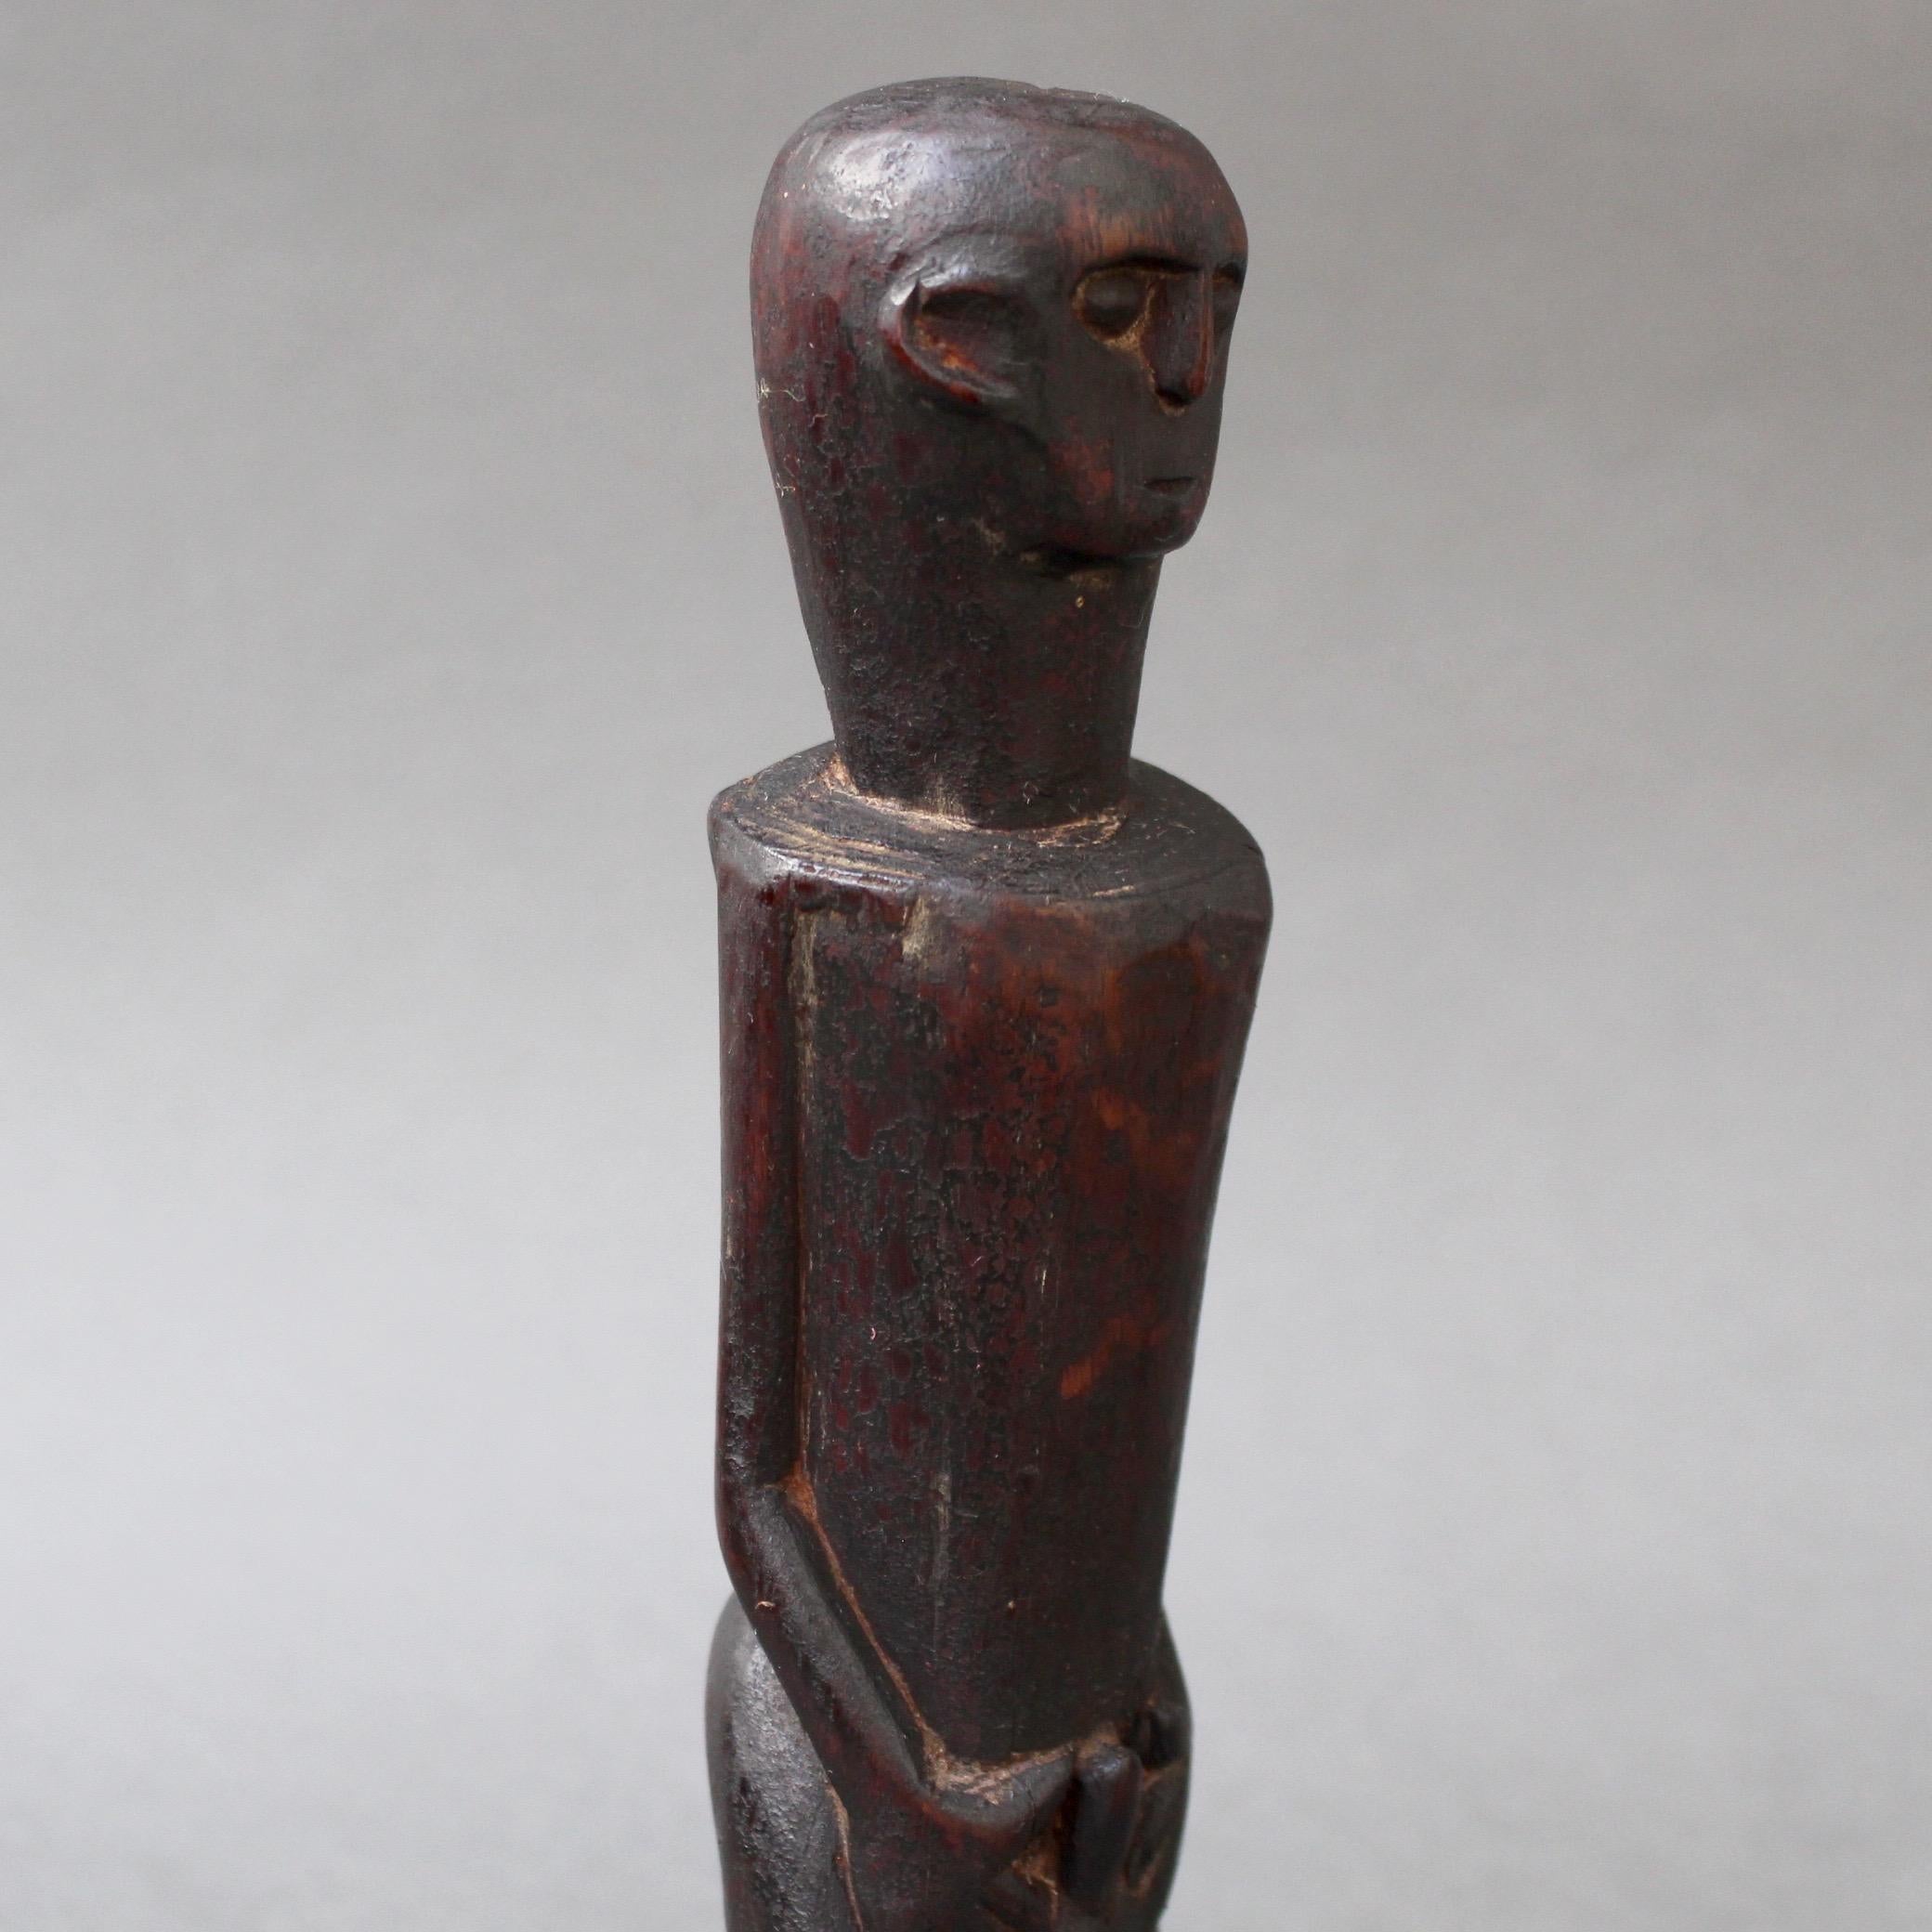 Wooden Sculpture or Carving of Fertility Figure from Sumba Island, Indonesia 4